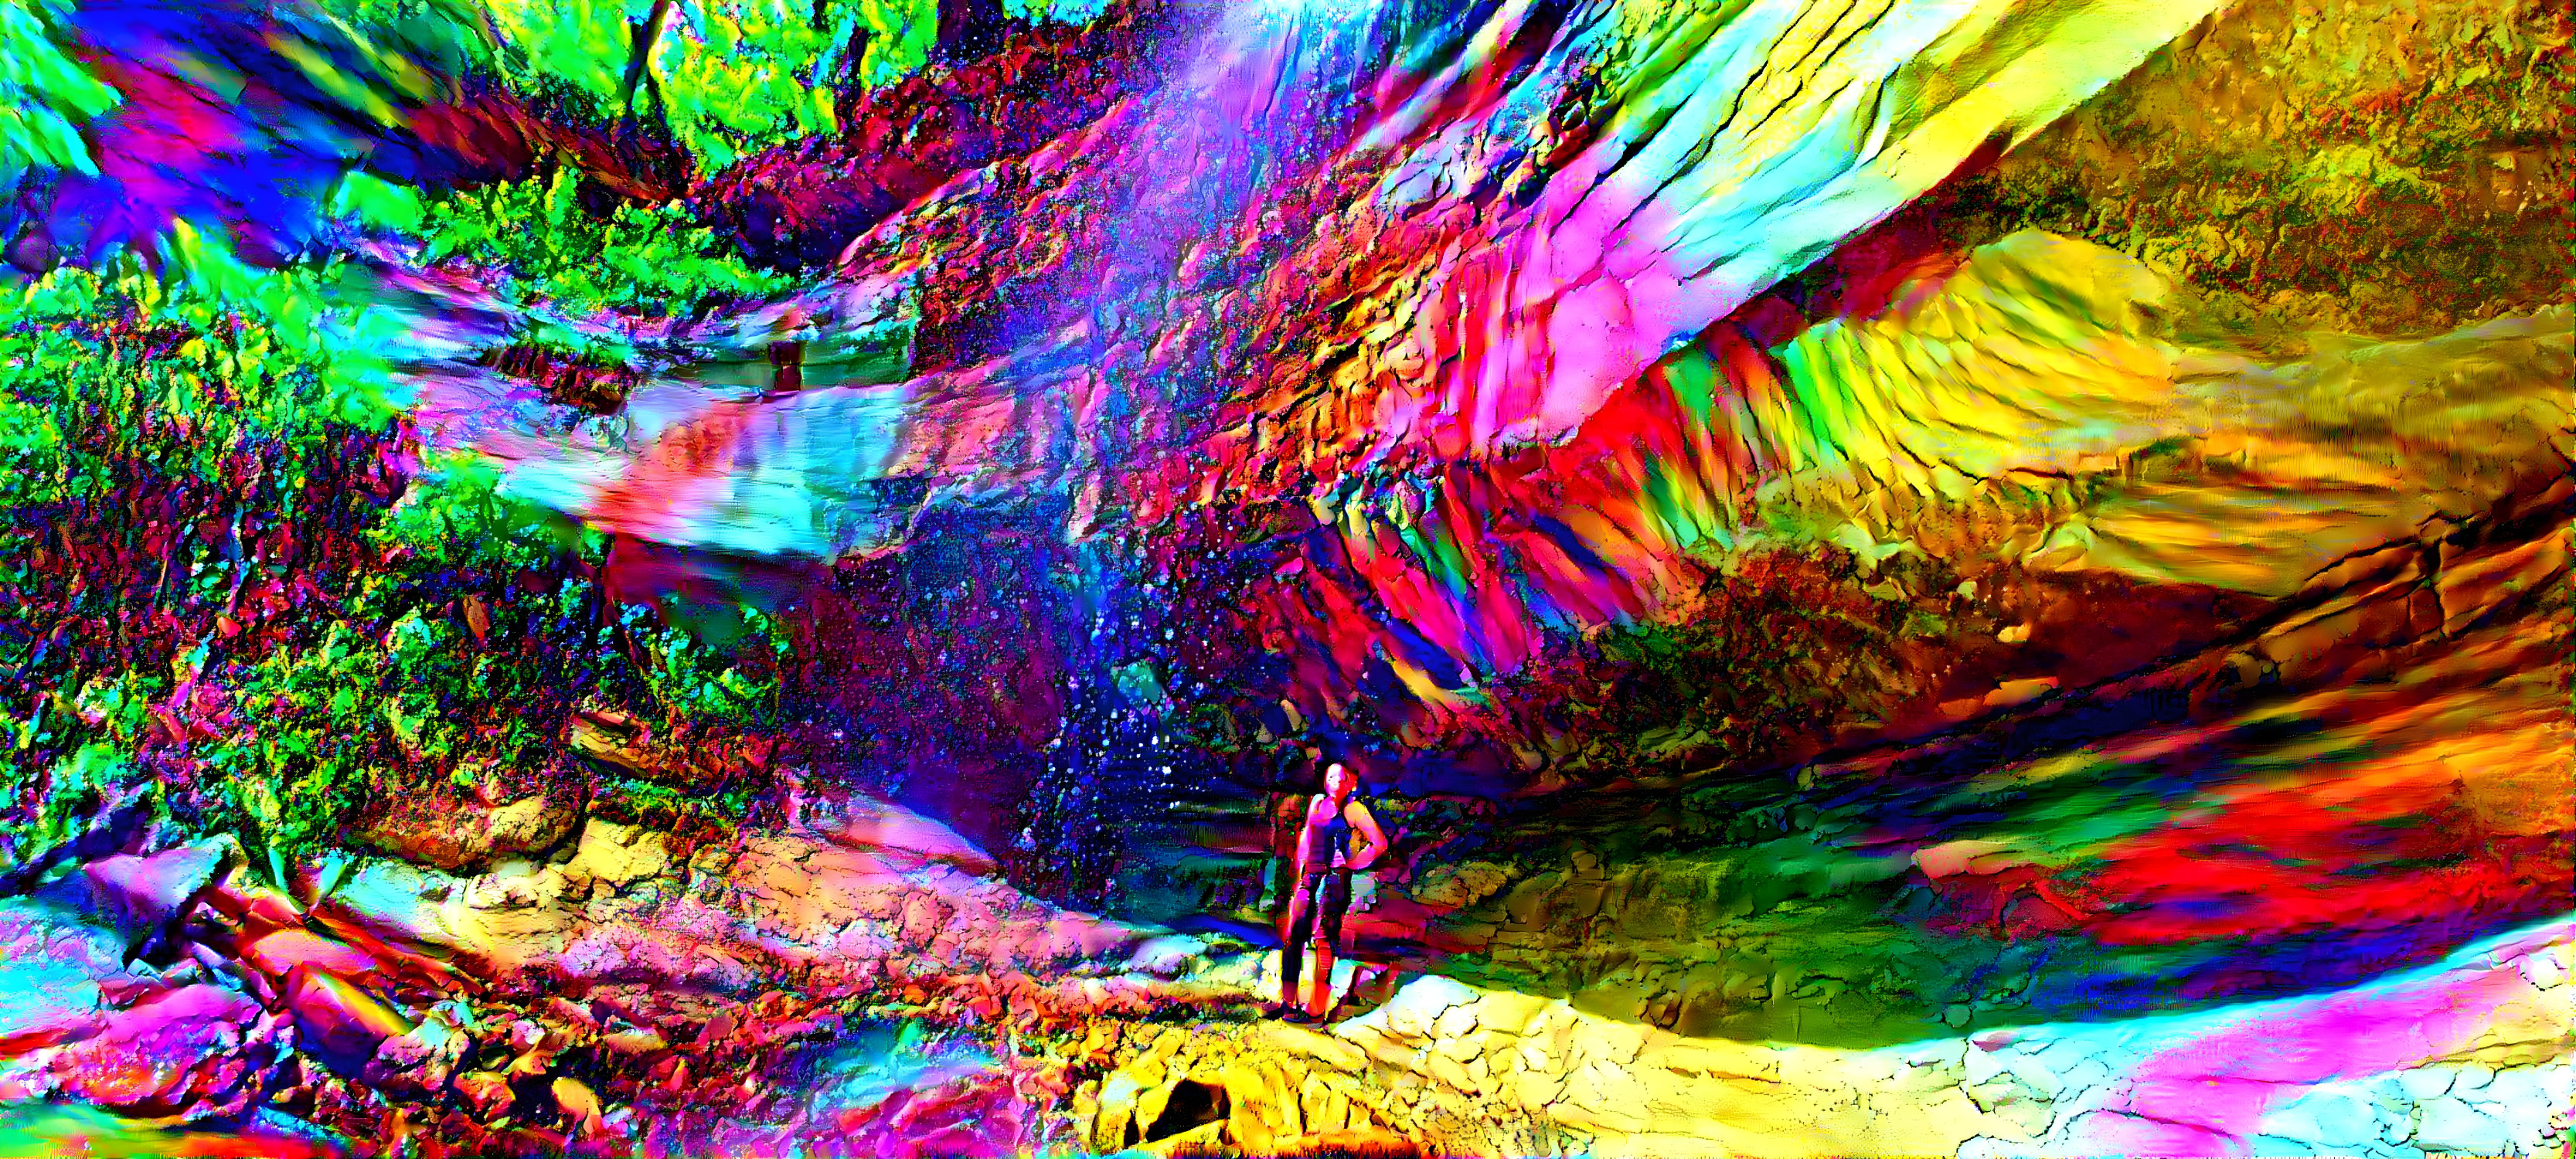 Psychedelic Waterfall 